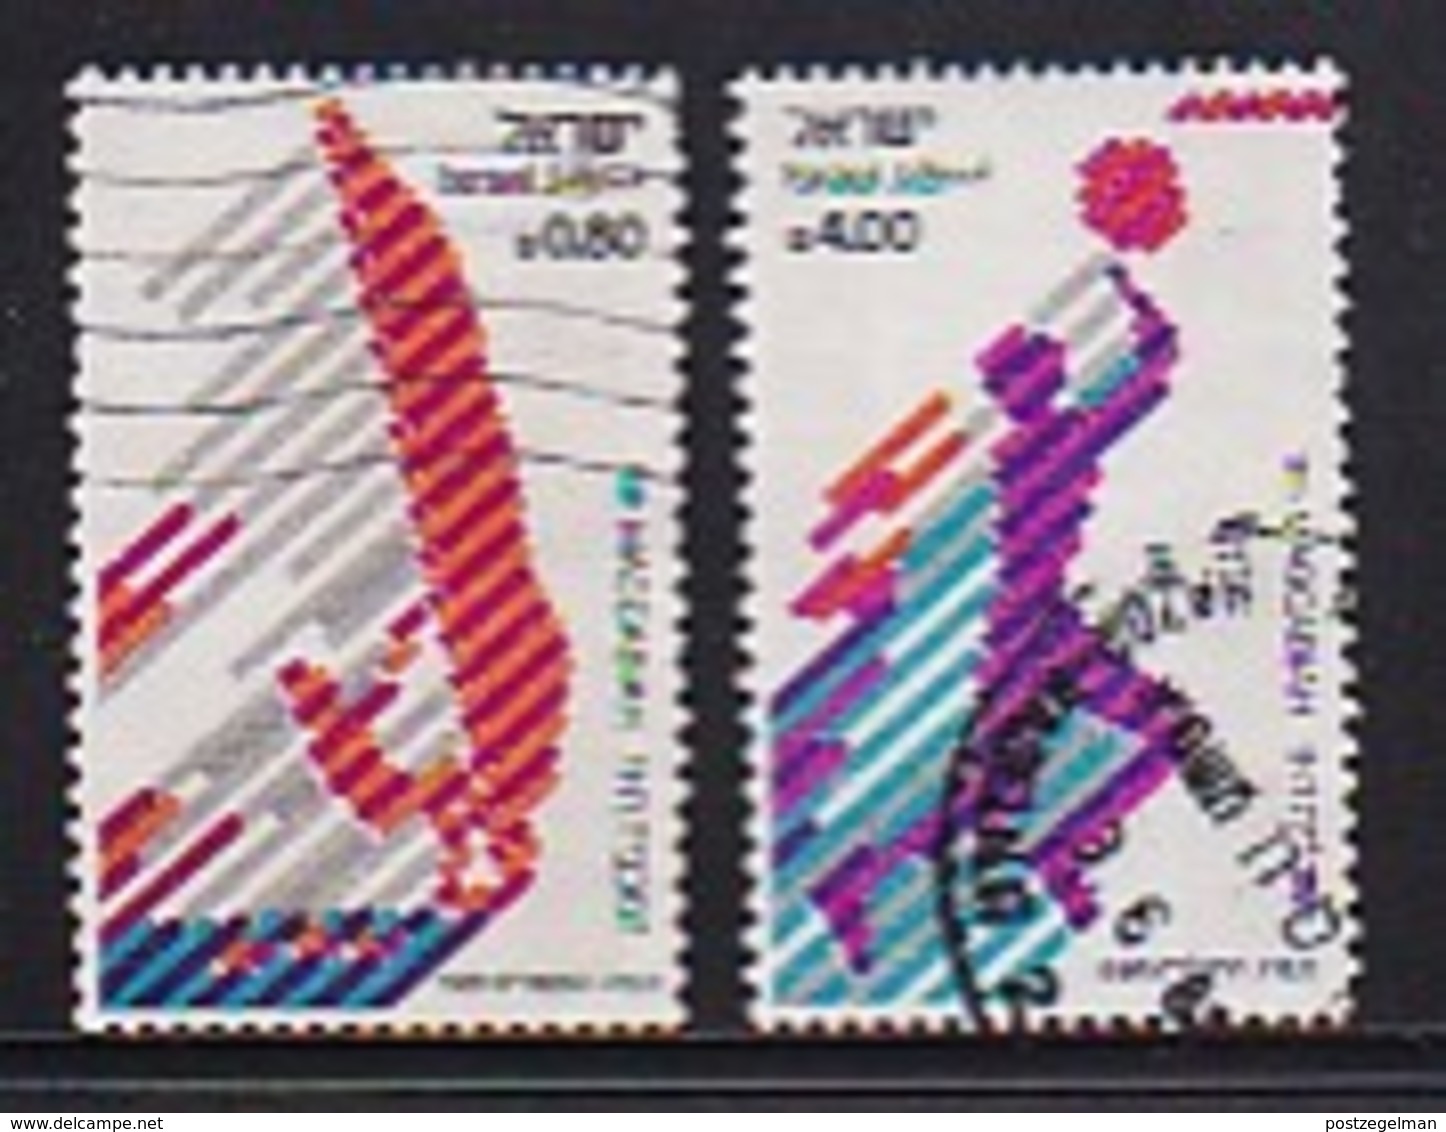 ISRAEL, 1981, Used Stamp(s), Without Tab, Maccabiah Games,  SGnr. 813=815, Scannr. 17513,  2 Values Only - Used Stamps (without Tabs)